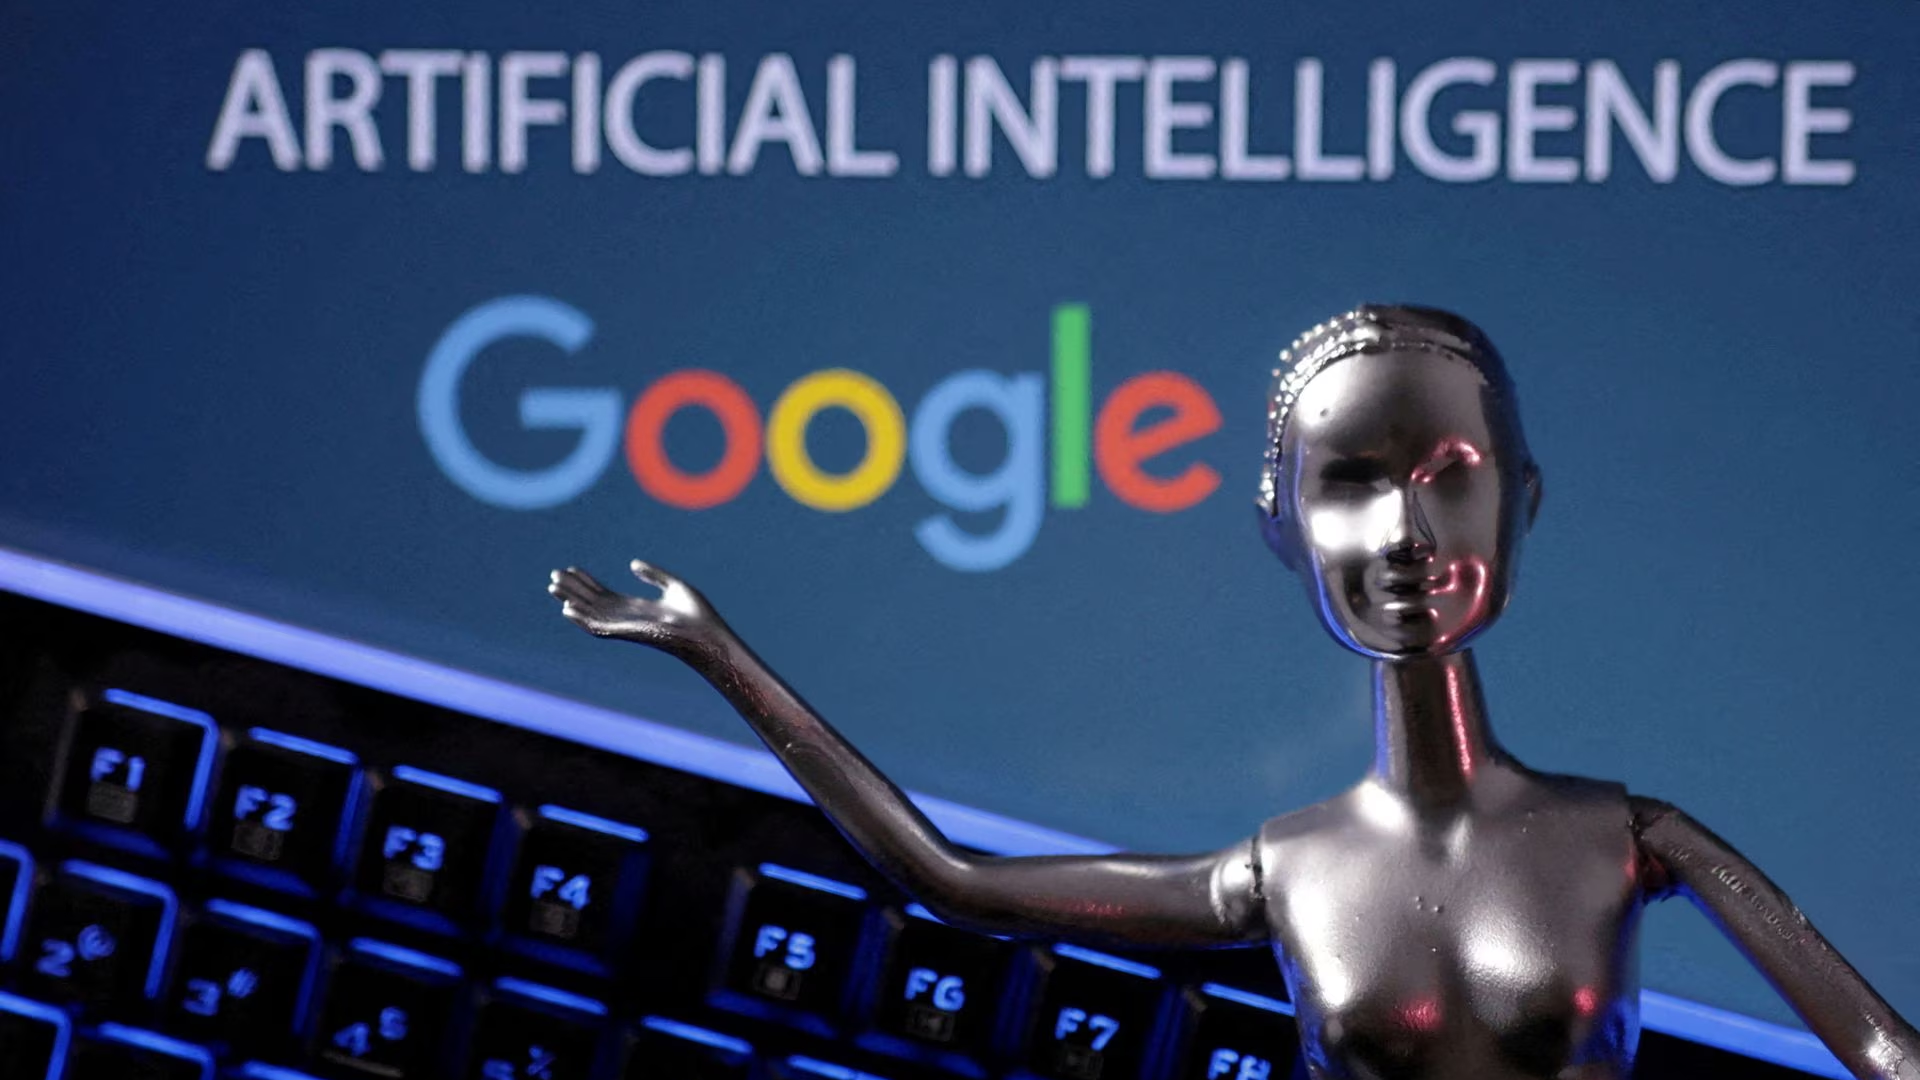 Google logo and AI Artificial Intelligence, May 4, 2023. /Reuters